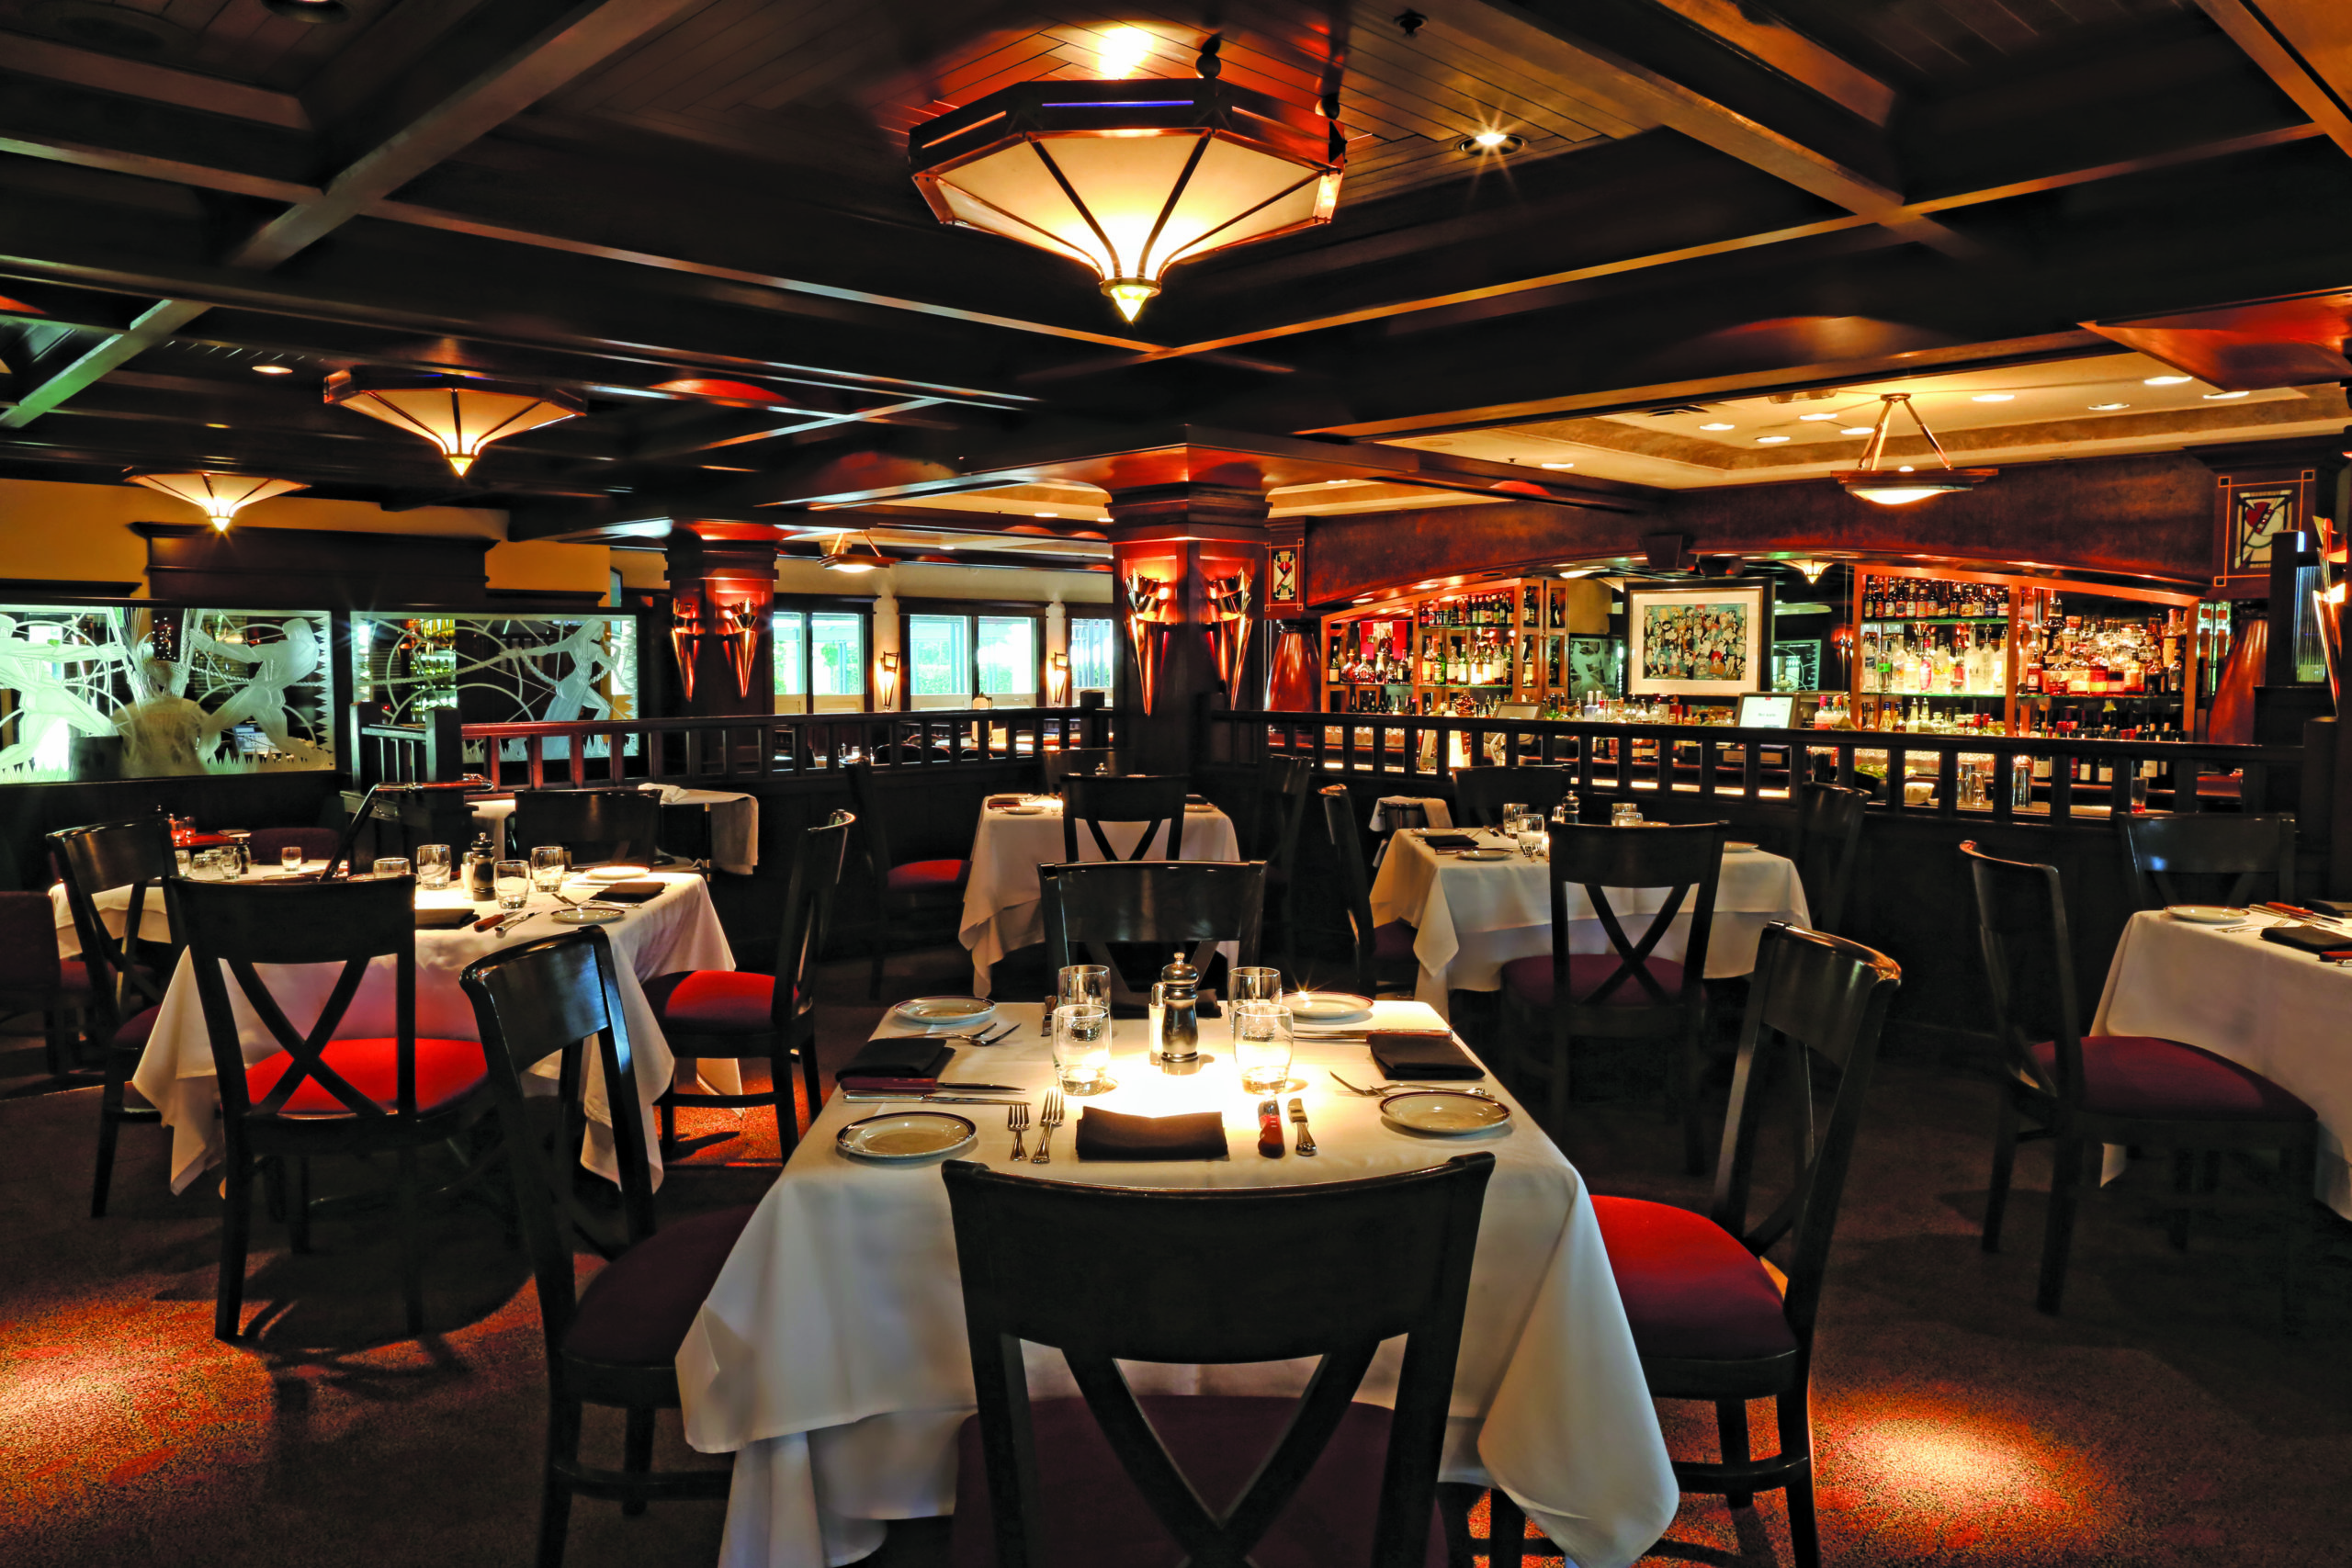 Chops Lobster Bar is a great date spot in Boca Raton and one of the great steakhouses